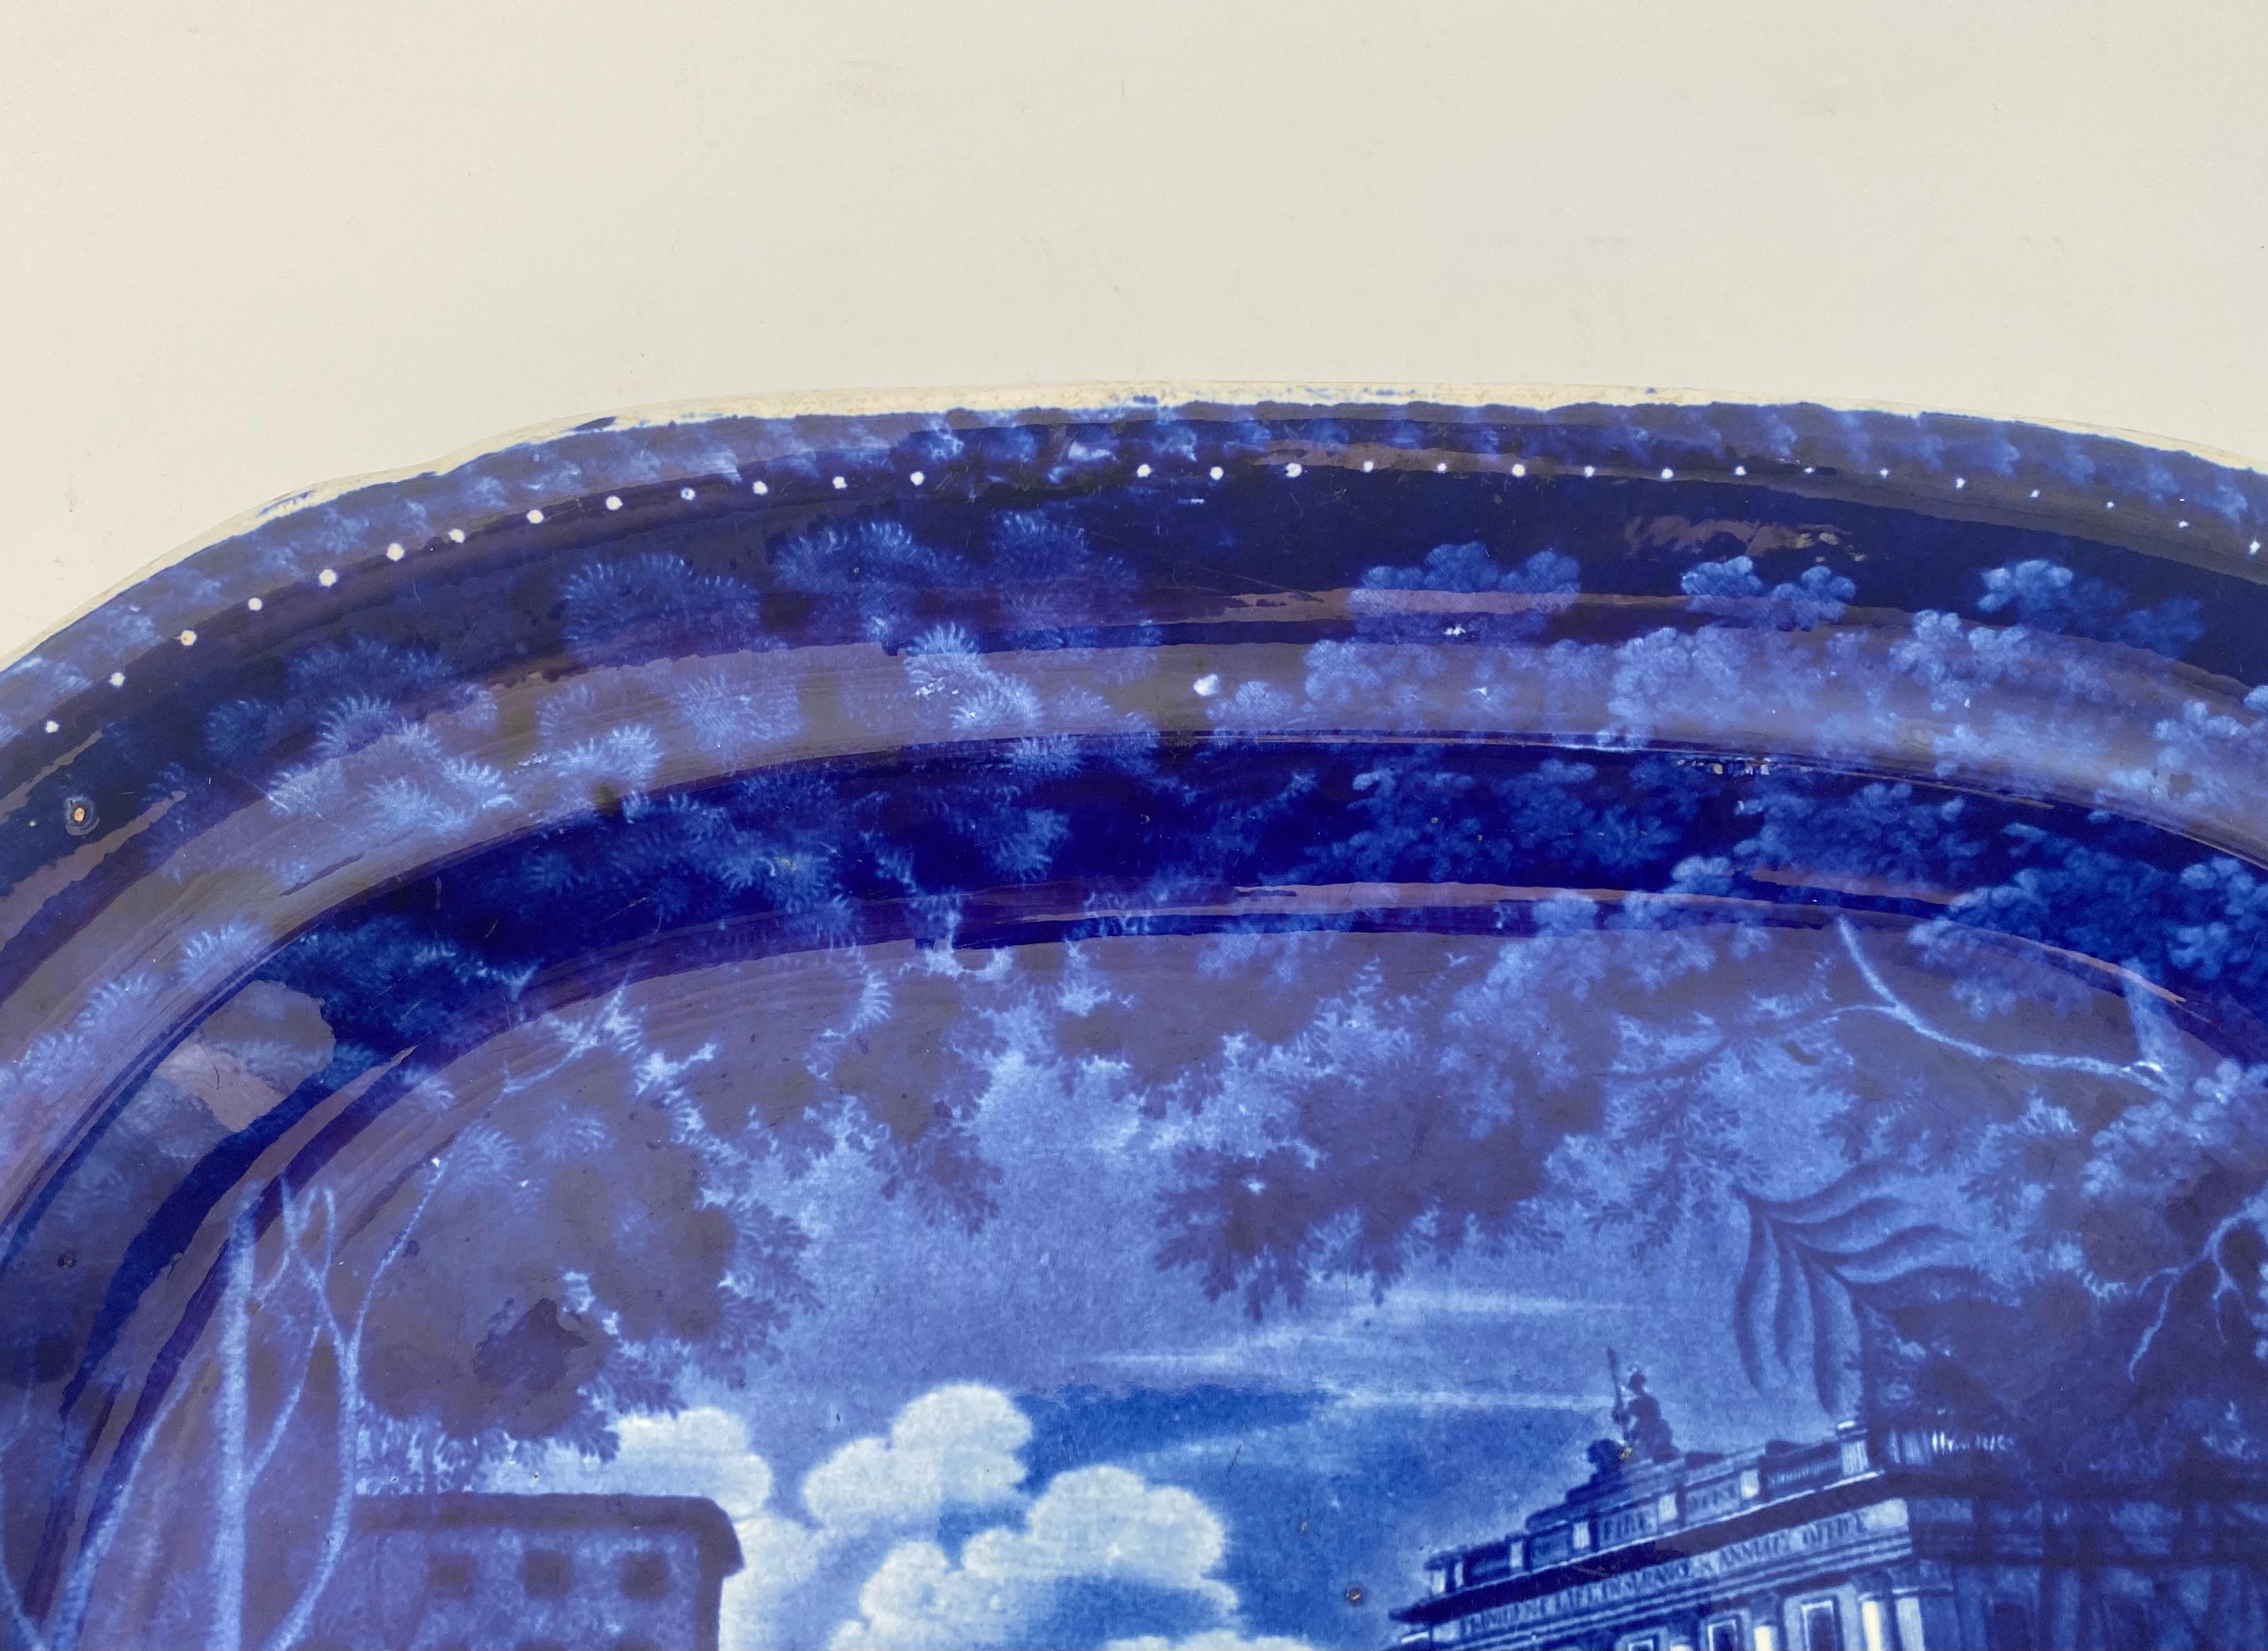 Staffordshire pottery meat plate, Adams Pottery c. 1830. Printed in underglaze blue, with a titled scene of ‘Regents Quadrant’, London. Showing a view of of figures and a dog, before the buildings along Regents Street. Framed by trees, and flowering